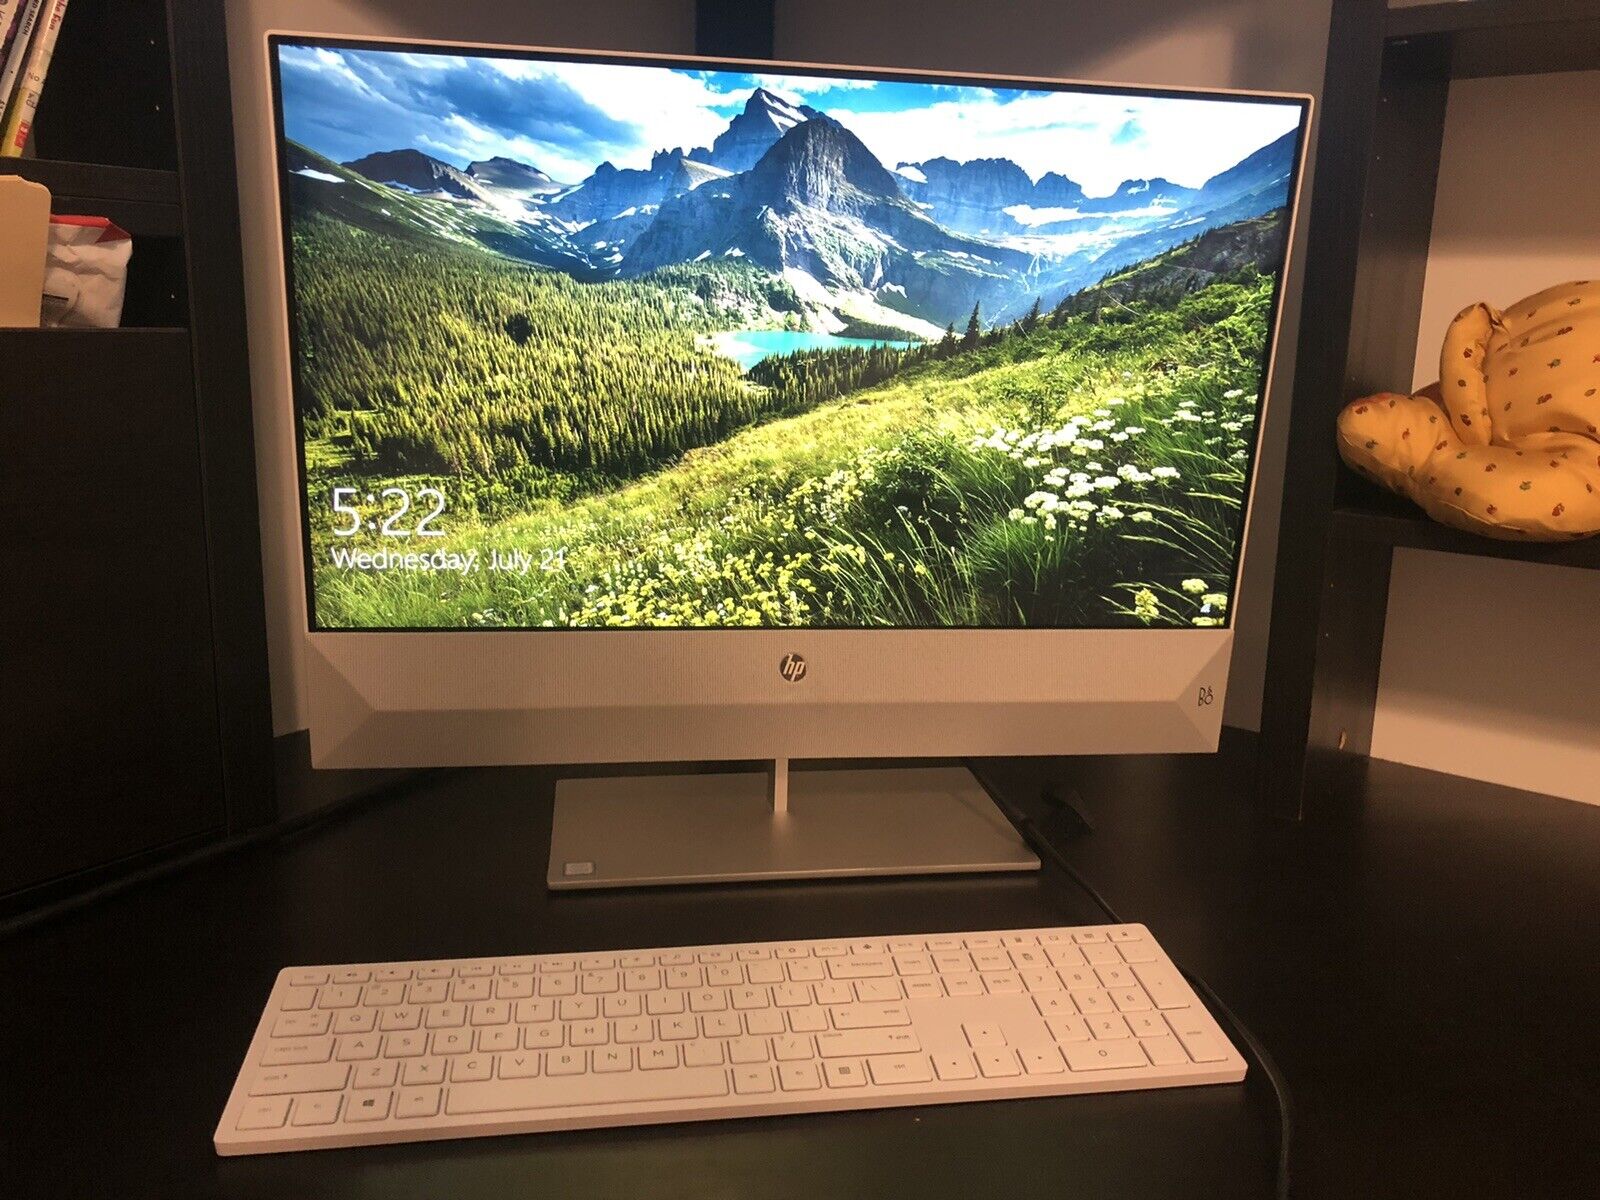 HP Pavilion 24-xa0024 (256GB, Intel Core i5, 1.7GHz, 12GB) All-In-One Computer